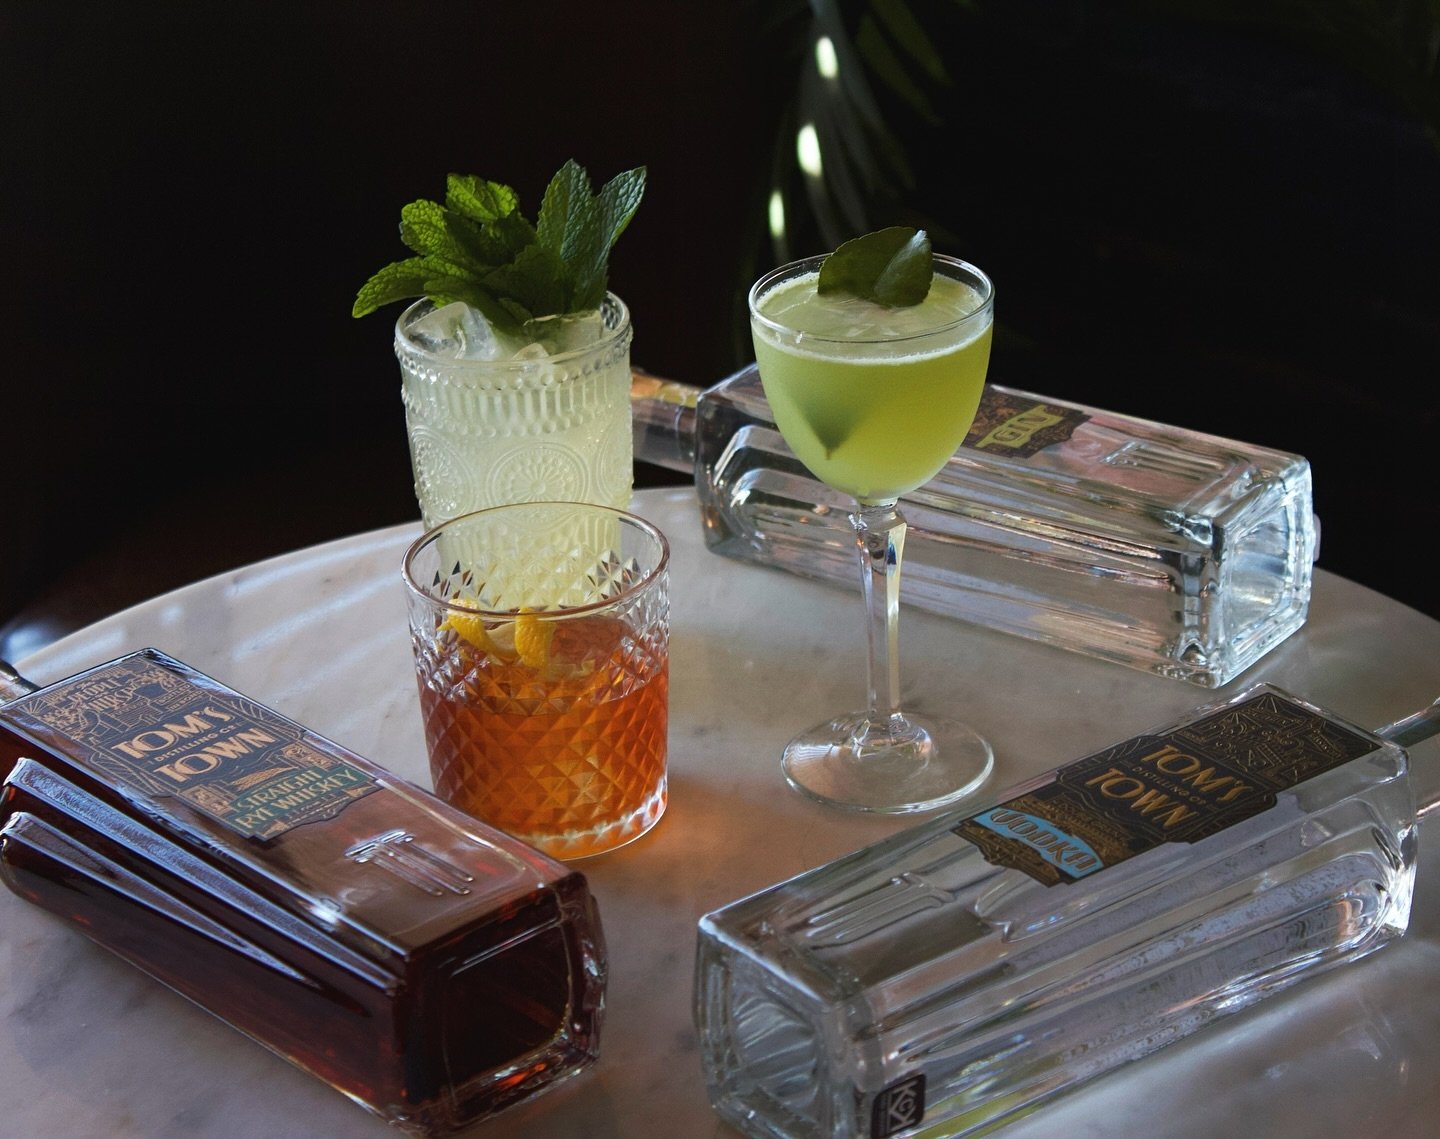 🎉 Kick off May with a bang at Pendergast Cocktail College! 🍸✨ 

Dive into &lsquo;Drowned Rabbit&rsquo; with our double grain vodka, discover &lsquo;Garden Gala&rsquo; with our botanical gin, or take a bold turn down the &lsquo;Boulevard&rsquo; with